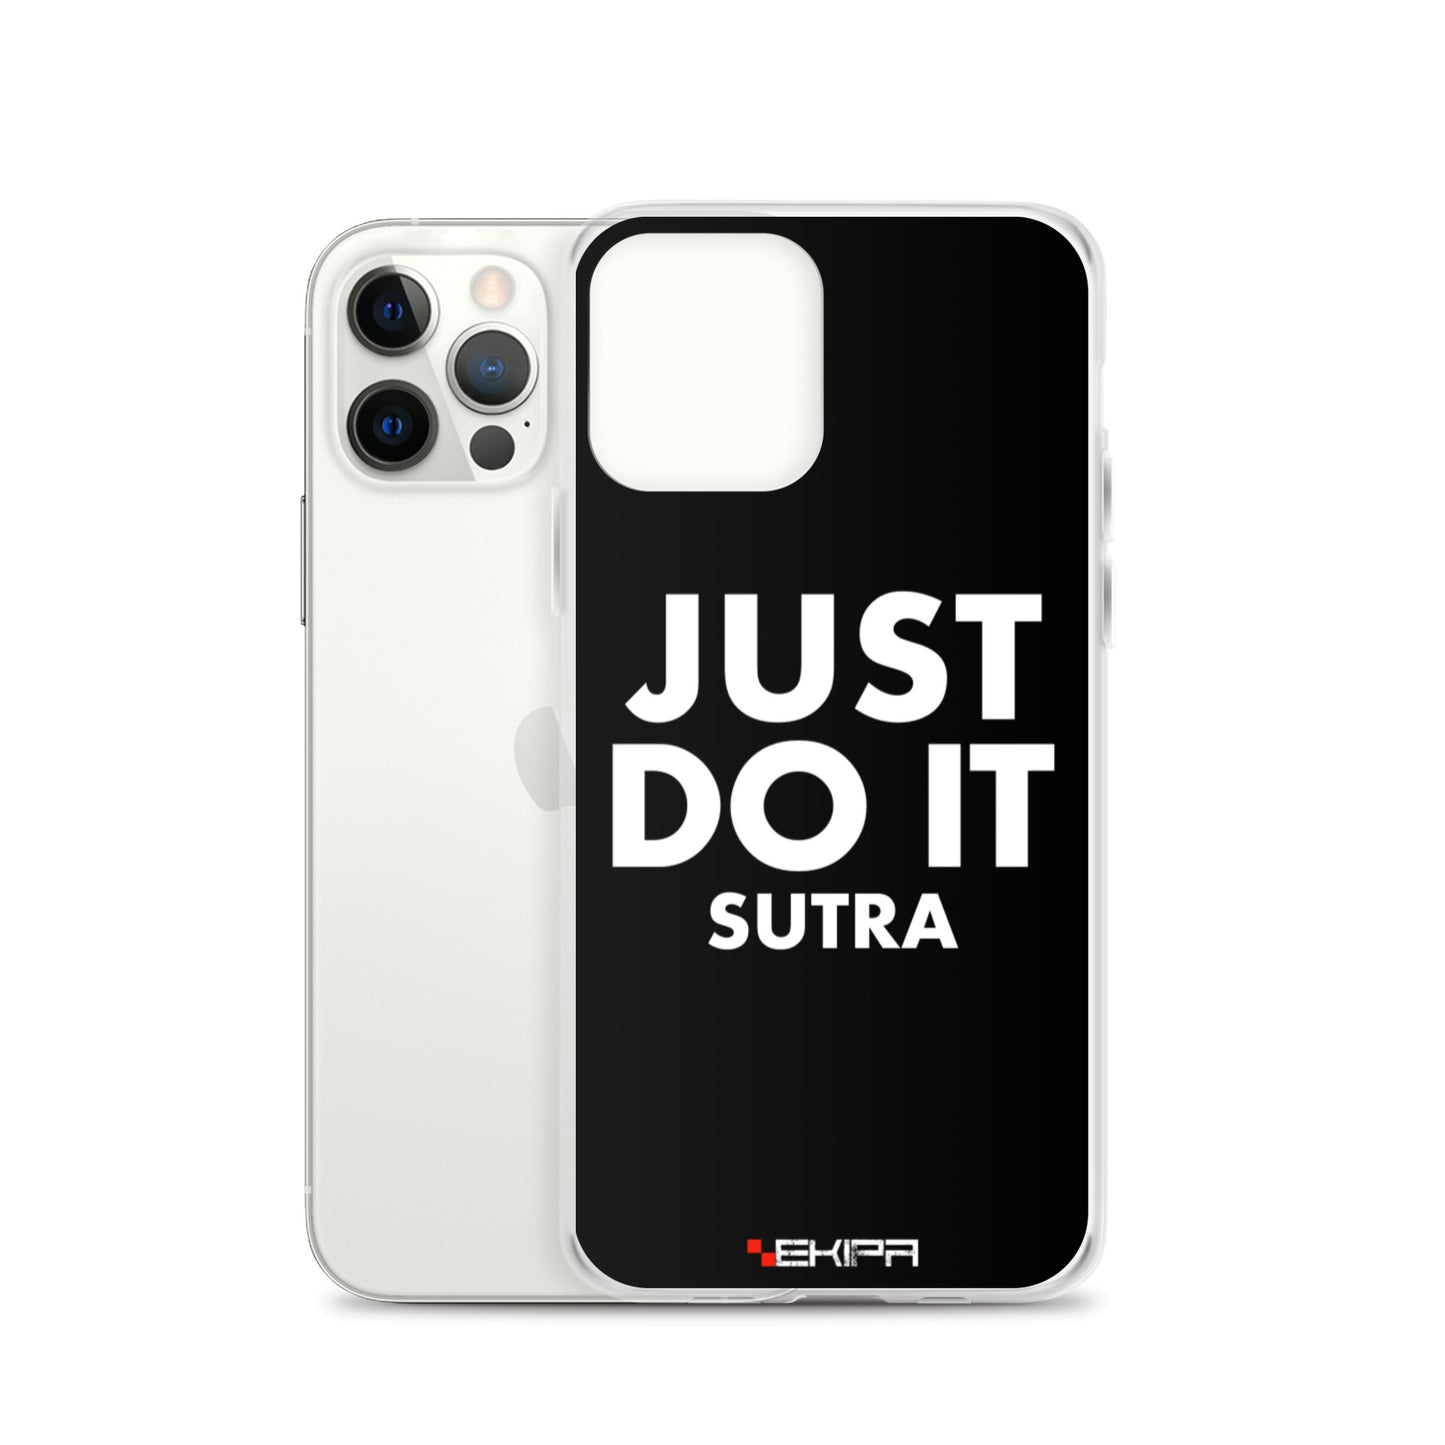 "Just do it sutra" - iPhone case